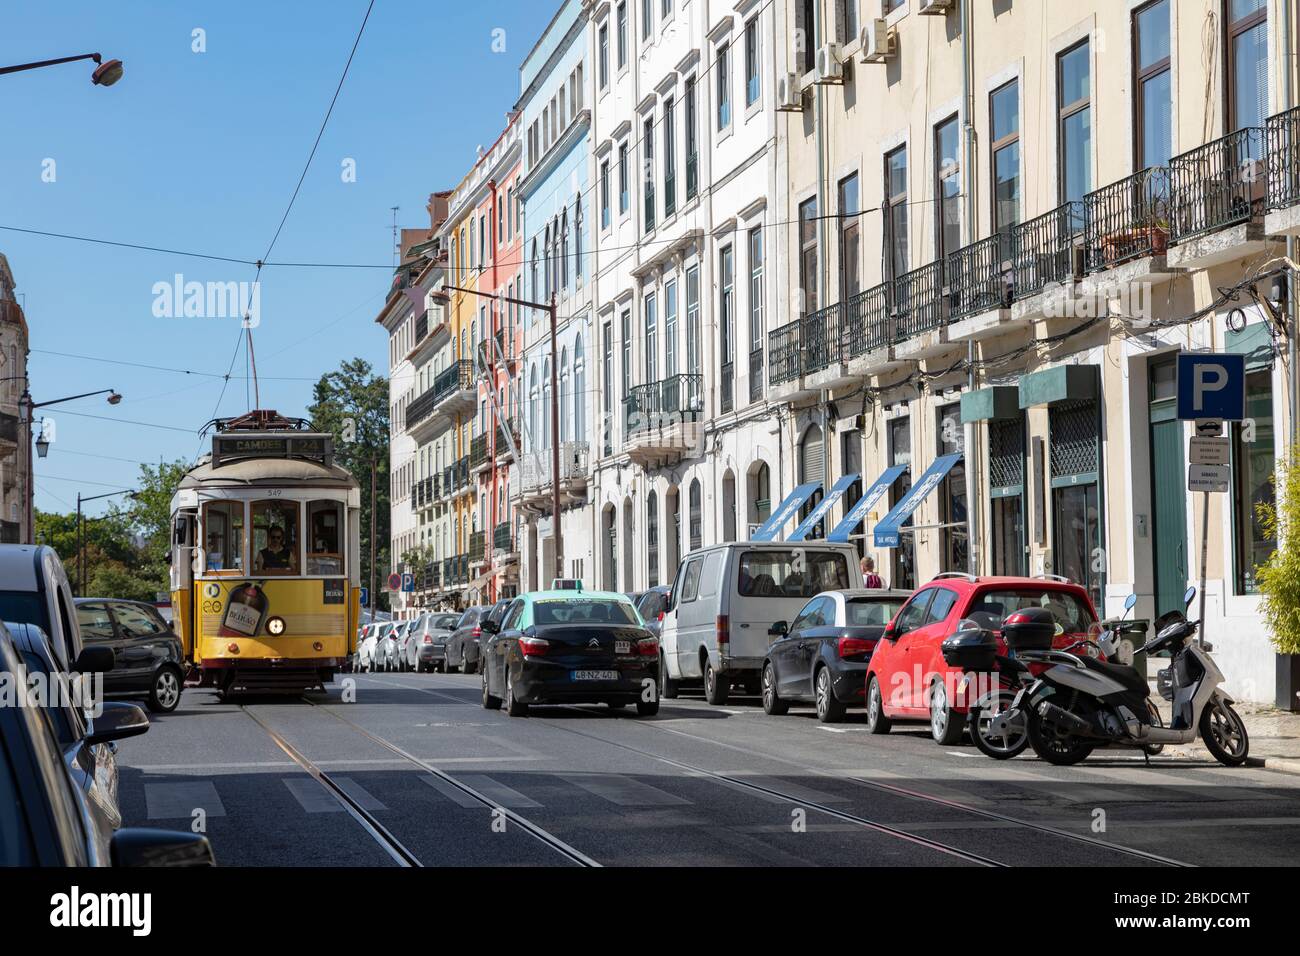 Busy lifestyle in the old town of Lisbon with traditional tram , shops and urban life in Bairro Alto district, Lisbon Portugal Stock Photo